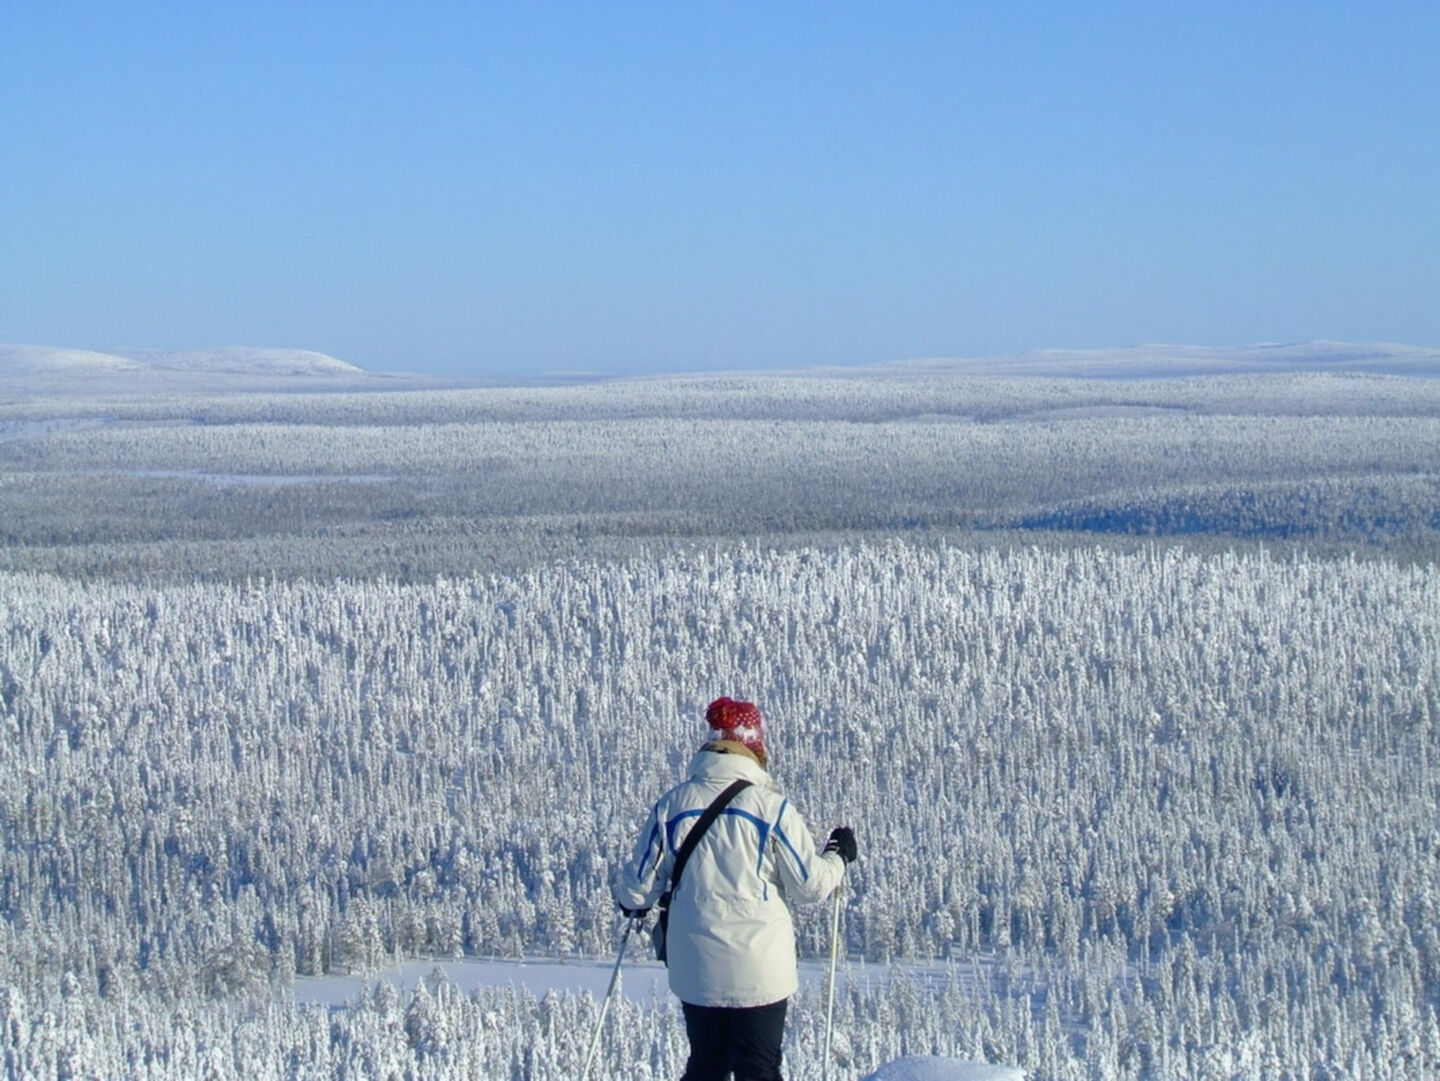 A bright spring day over the wilderness location of Salla, Finland